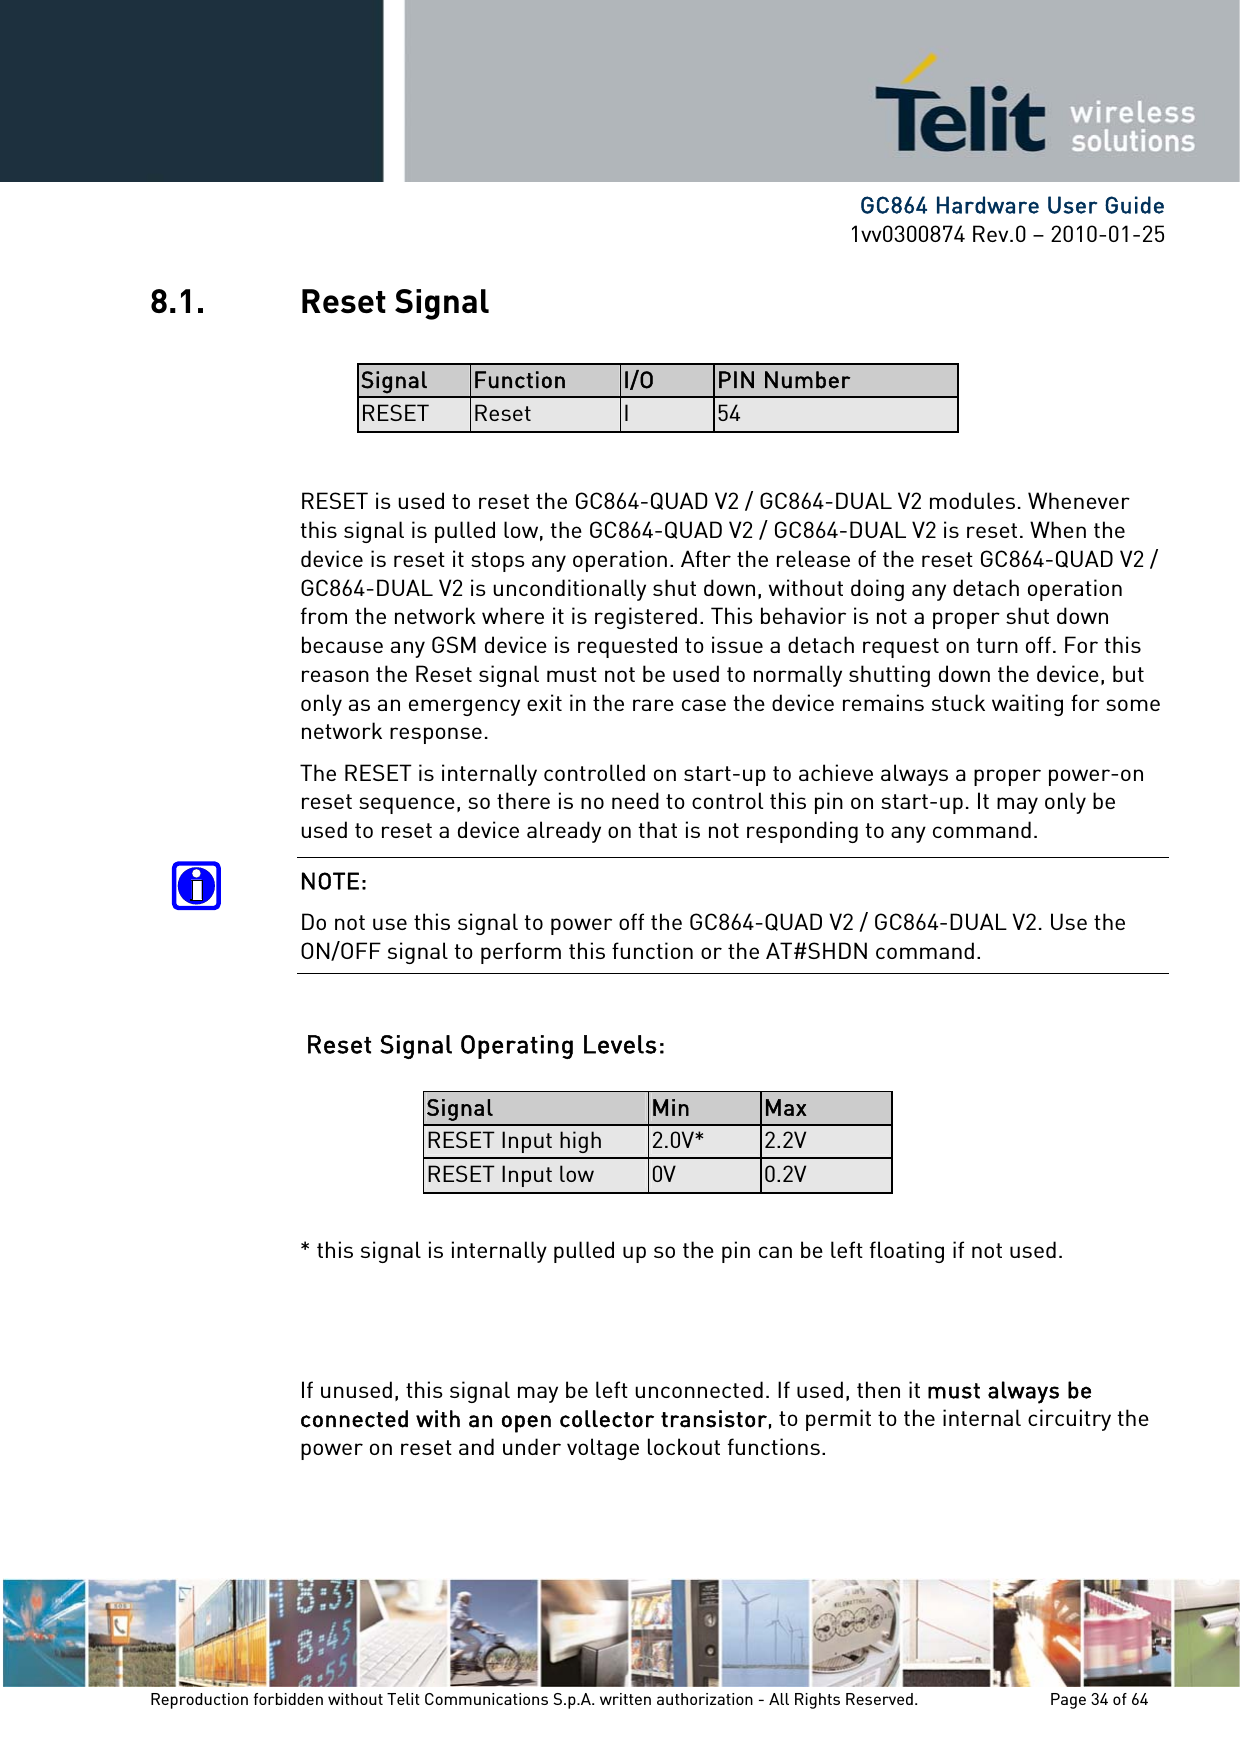      GC864 Hardware User Guide 1vv0300874 Rev.0 – 2010-01-25 Reproduction forbidden without Telit Communications S.p.A. written authorization - All Rights Reserved.    Page 34 of 64  8.1. Reset Signal  Signal  Function  I/O  PIN Number RESET  Reset  I  54  RESET is used to reset the GC864-QUAD V2 / GC864-DUAL V2 modules. Whenever this signal is pulled low, the GC864-QUAD V2 / GC864-DUAL V2 is reset. When the device is reset it stops any operation. After the release of the reset GC864-QUAD V2 / GC864-DUAL V2 is unconditionally shut down, without doing any detach operation from the network where it is registered. This behavior is not a proper shut down because any GSM device is requested to issue a detach request on turn off. For this reason the Reset signal must not be used to normally shutting down the device, but only as an emergency exit in the rare case the device remains stuck waiting for some network response. The RESET is internally controlled on start-up to achieve always a proper power-on reset sequence, so there is no need to control this pin on start-up. It may only be used to reset a device already on that is not responding to any command. NOTE: Do not use this signal to power off the GC864-QUAD V2 / GC864-DUAL V2. Use the ON/OFF signal to perform this function or the AT#SHDN command.  Reset Signal Operating Levels:  Signal  Min  Max RESET Input high  2.0V*  2.2V RESET Input low  0V  0.2V  * this signal is internally pulled up so the pin can be left floating if not used.    If unused, this signal may be left unconnected. If used, then it must always be connected with an open collector transistor, to permit to the internal circuitry the power on reset and under voltage lockout functions. 